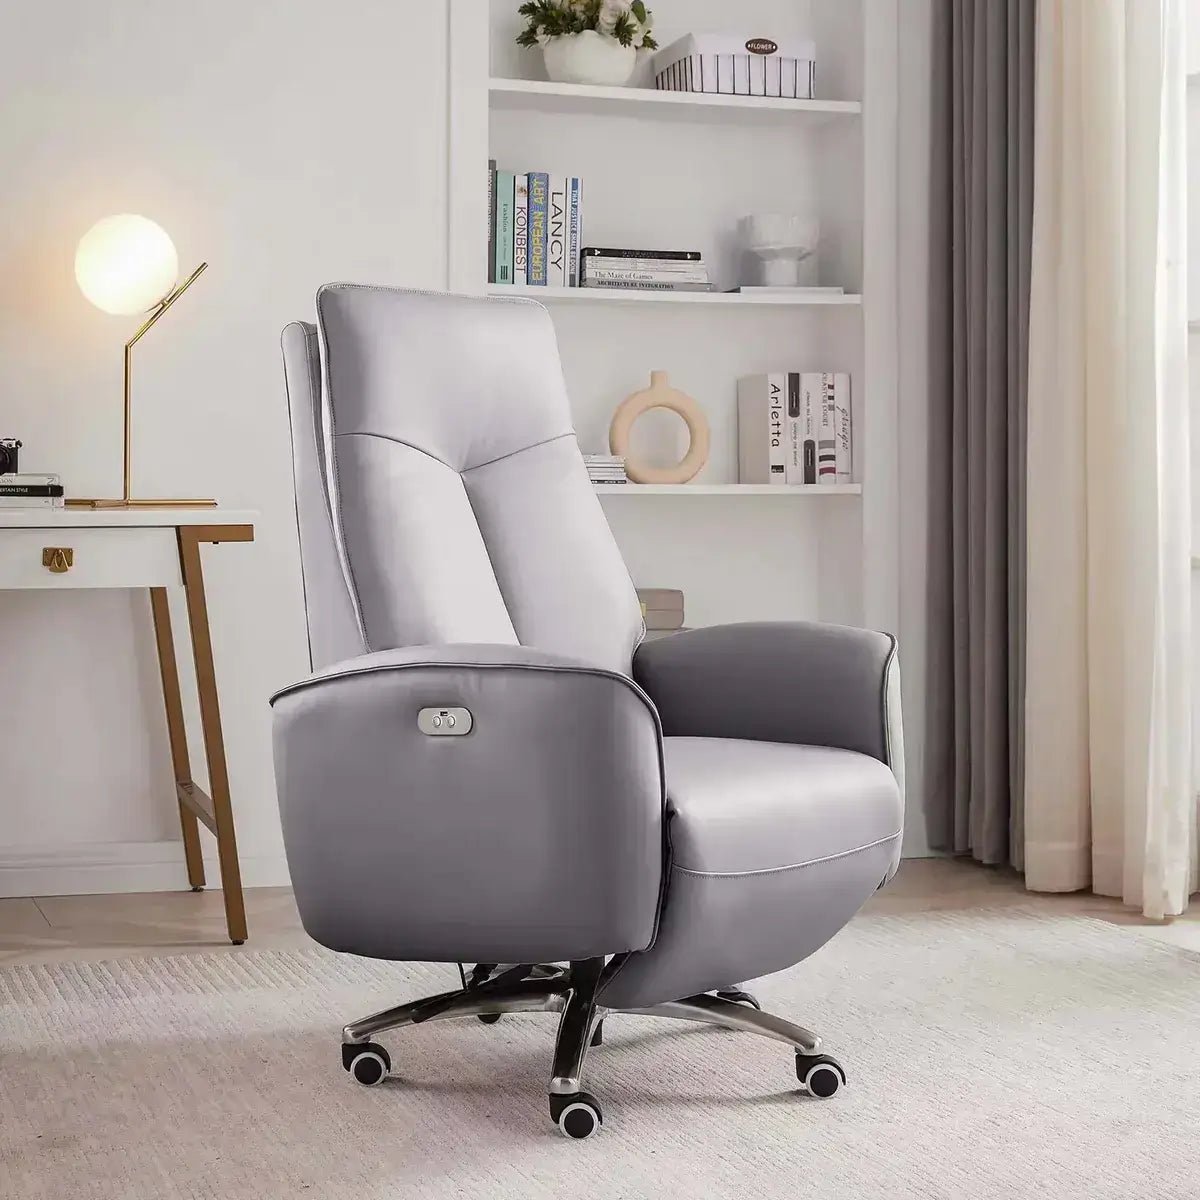 Surprising Health Benefits of Using A Reclining Chair - Lazy Maisons®